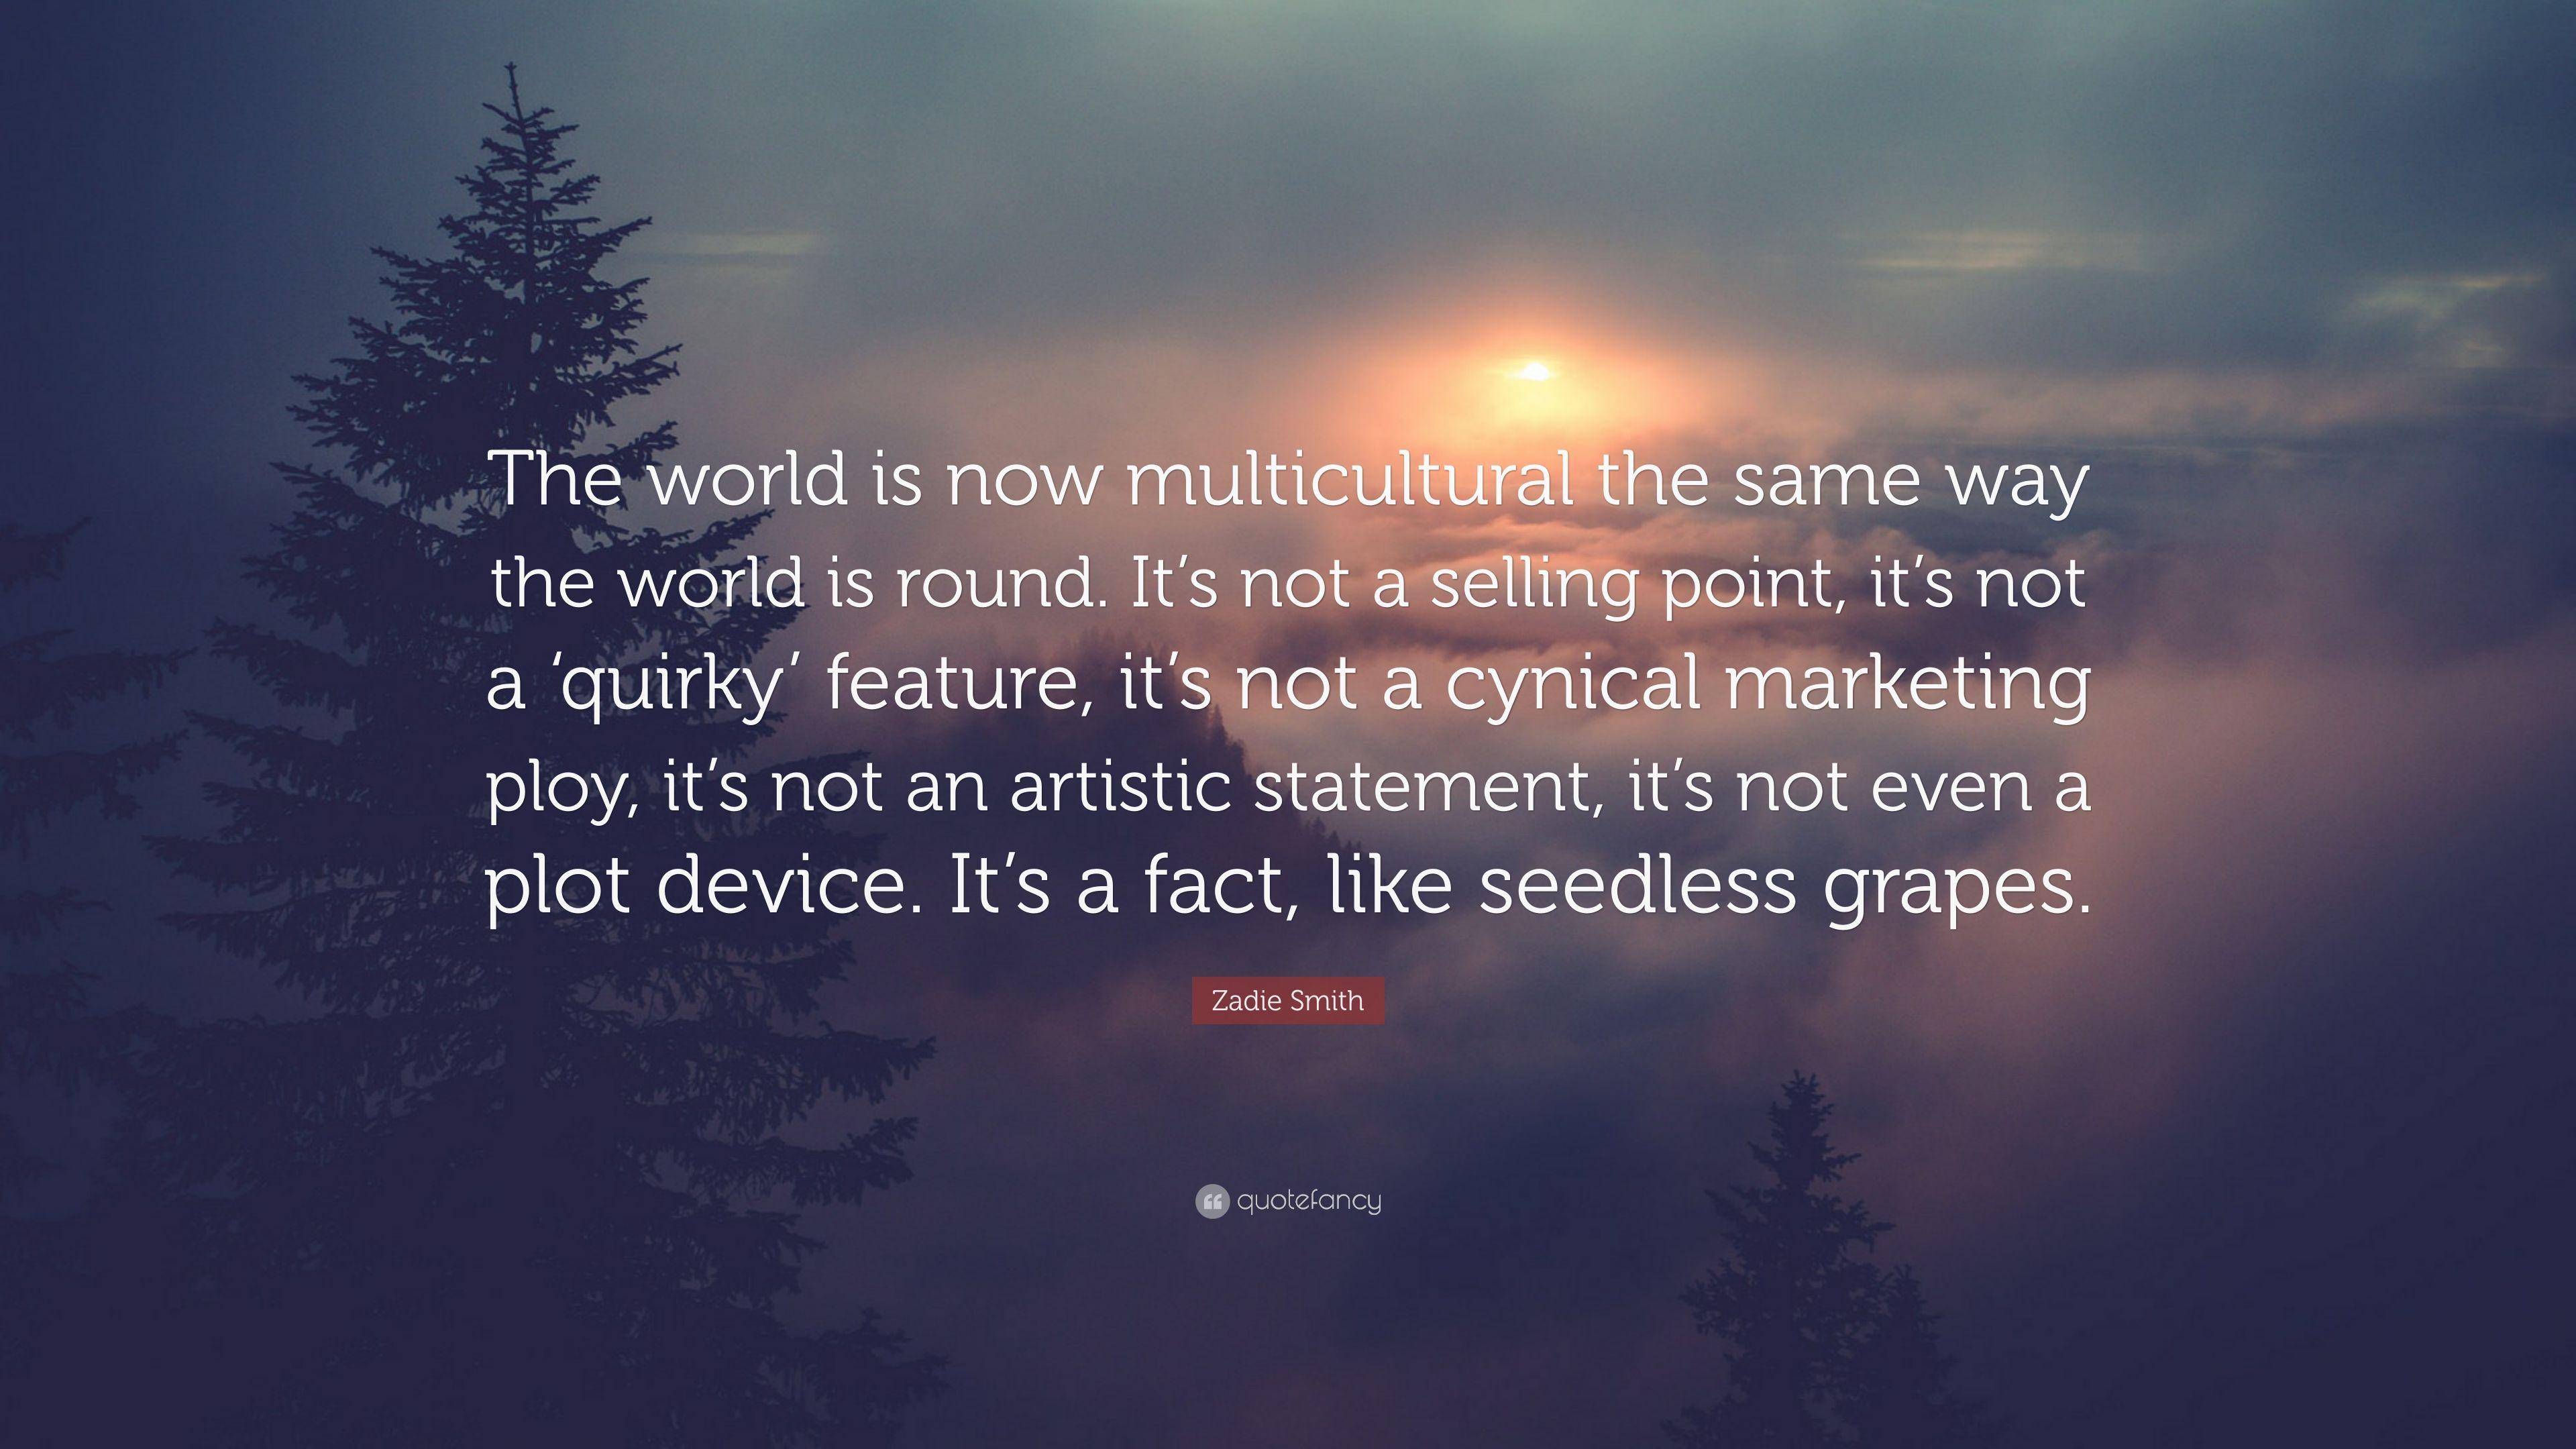 Zadie Smith Quote: “The world is now multicultural the same